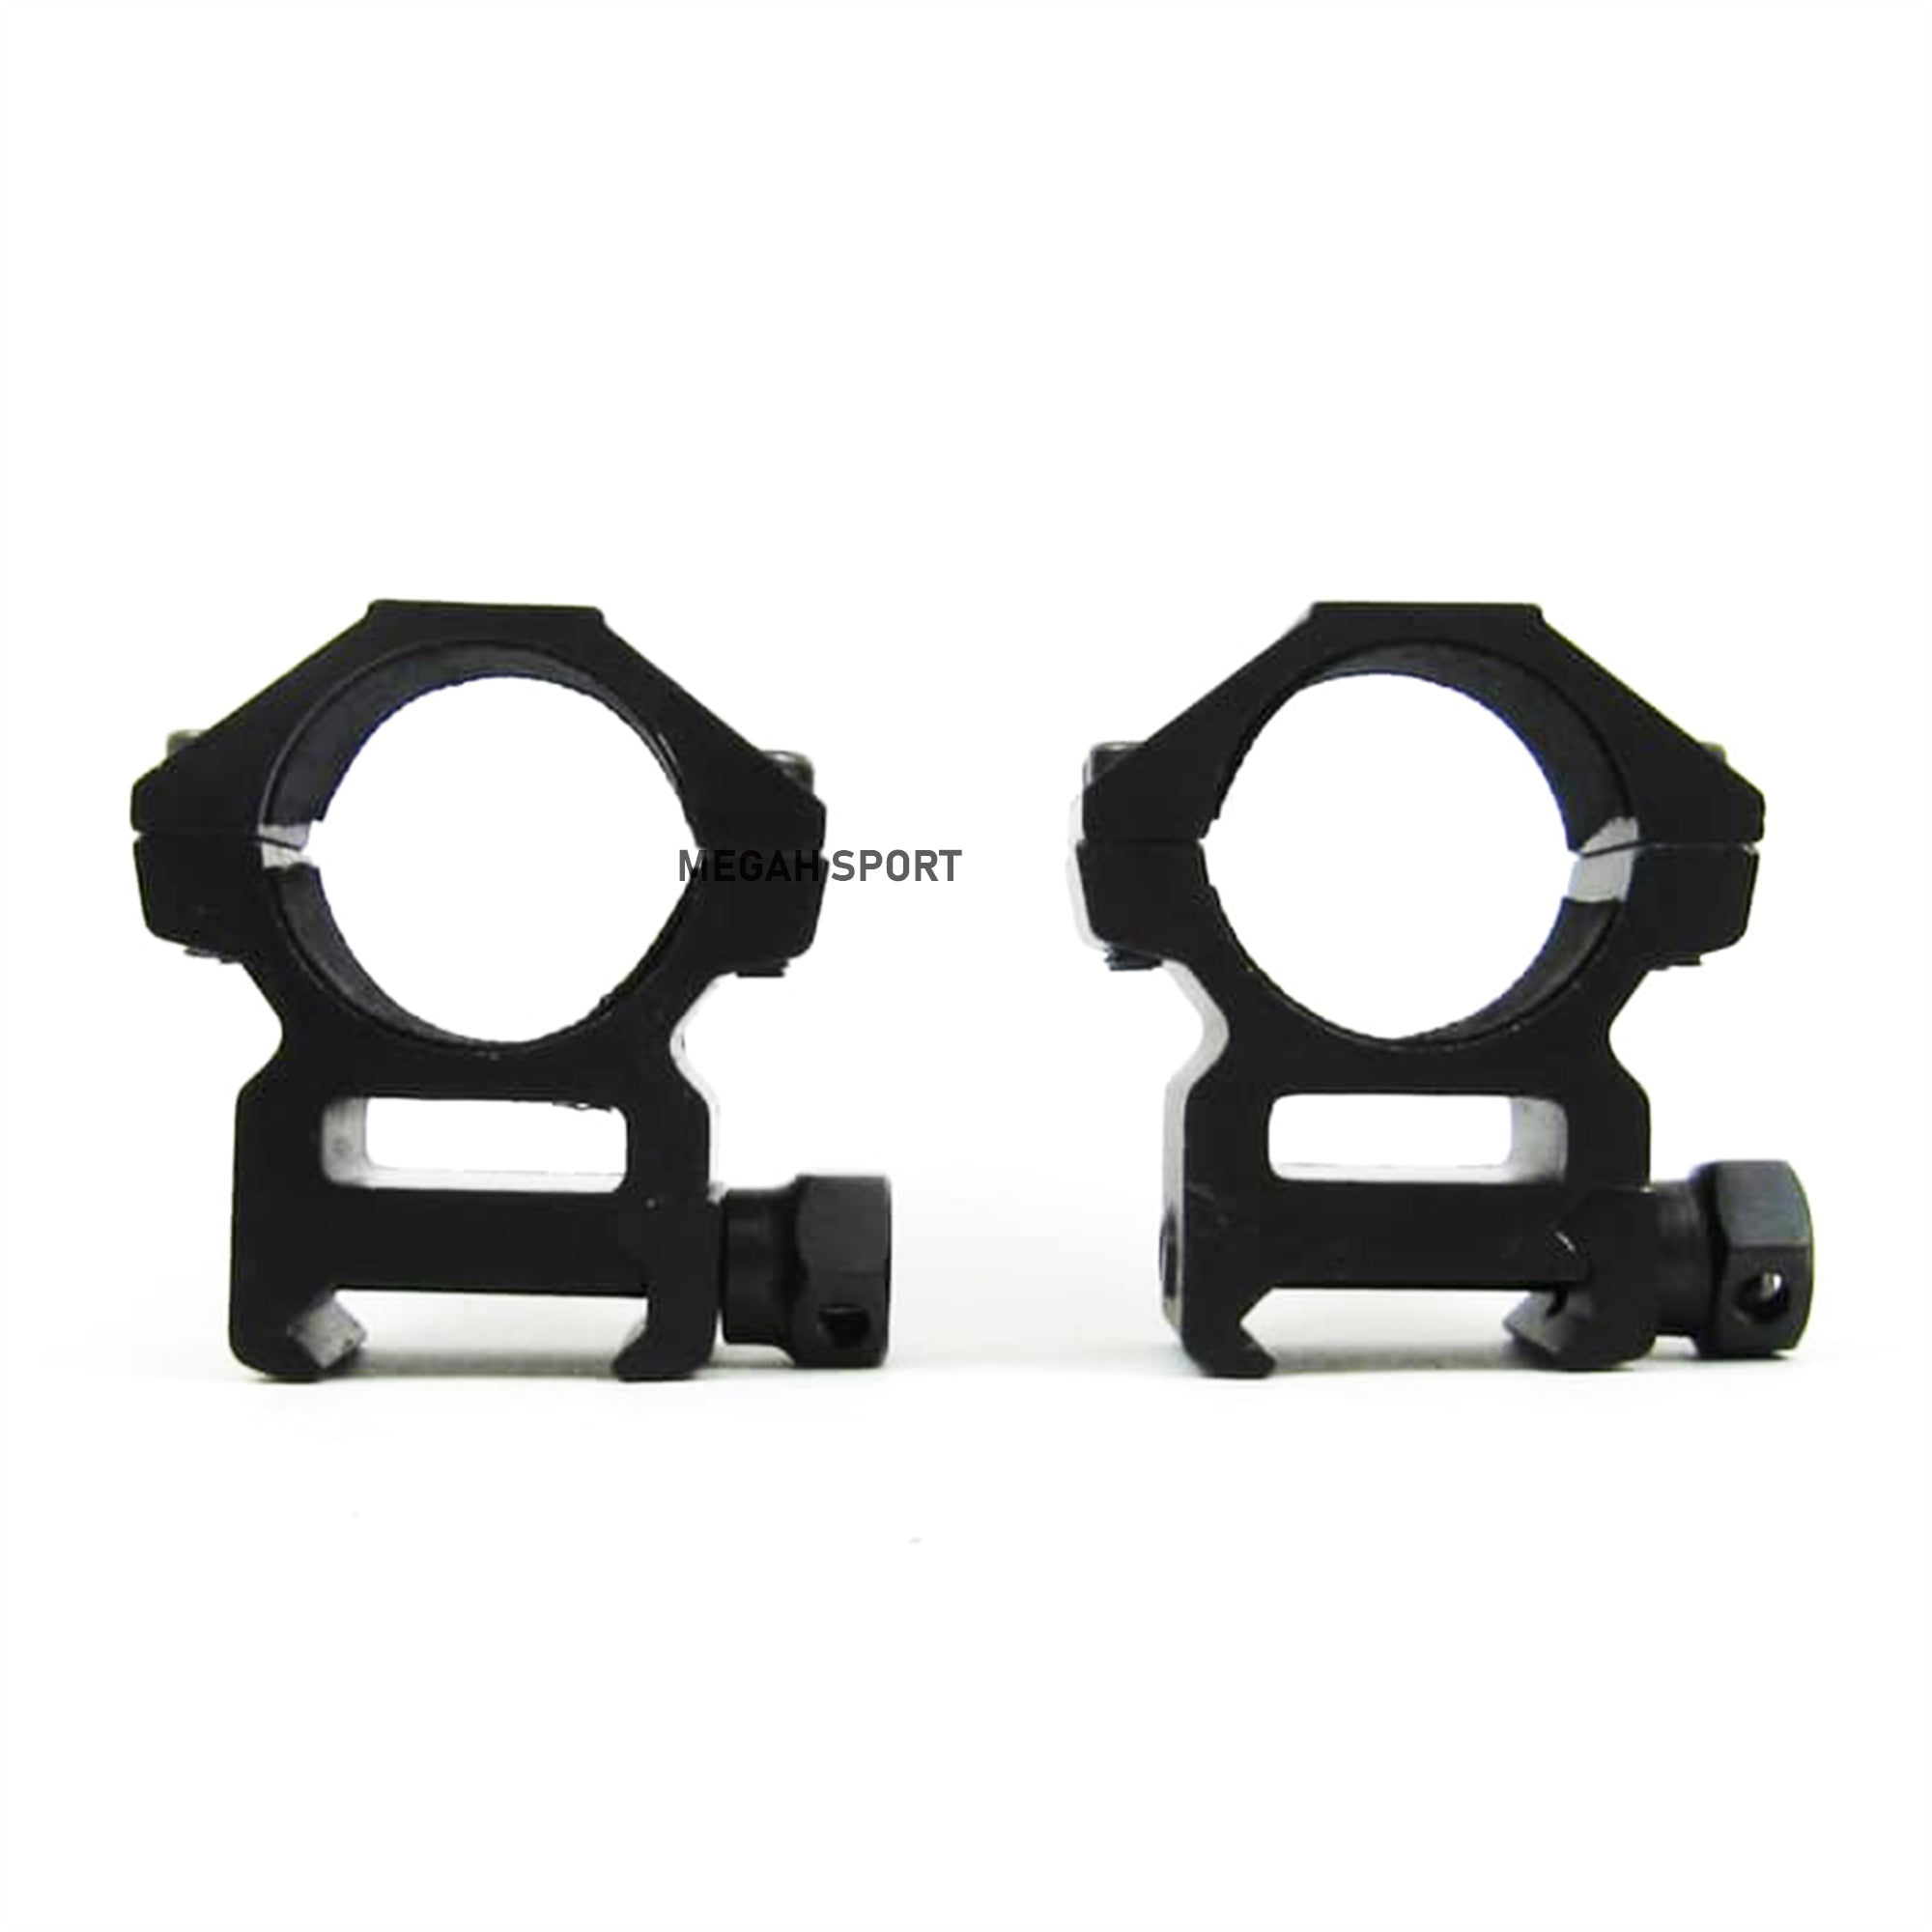 RING MOUNTING RAMBO DOUBLE BAUT OD 25.4mm / 1 inch 3/8 5/8 (MT530) - Megah Sport